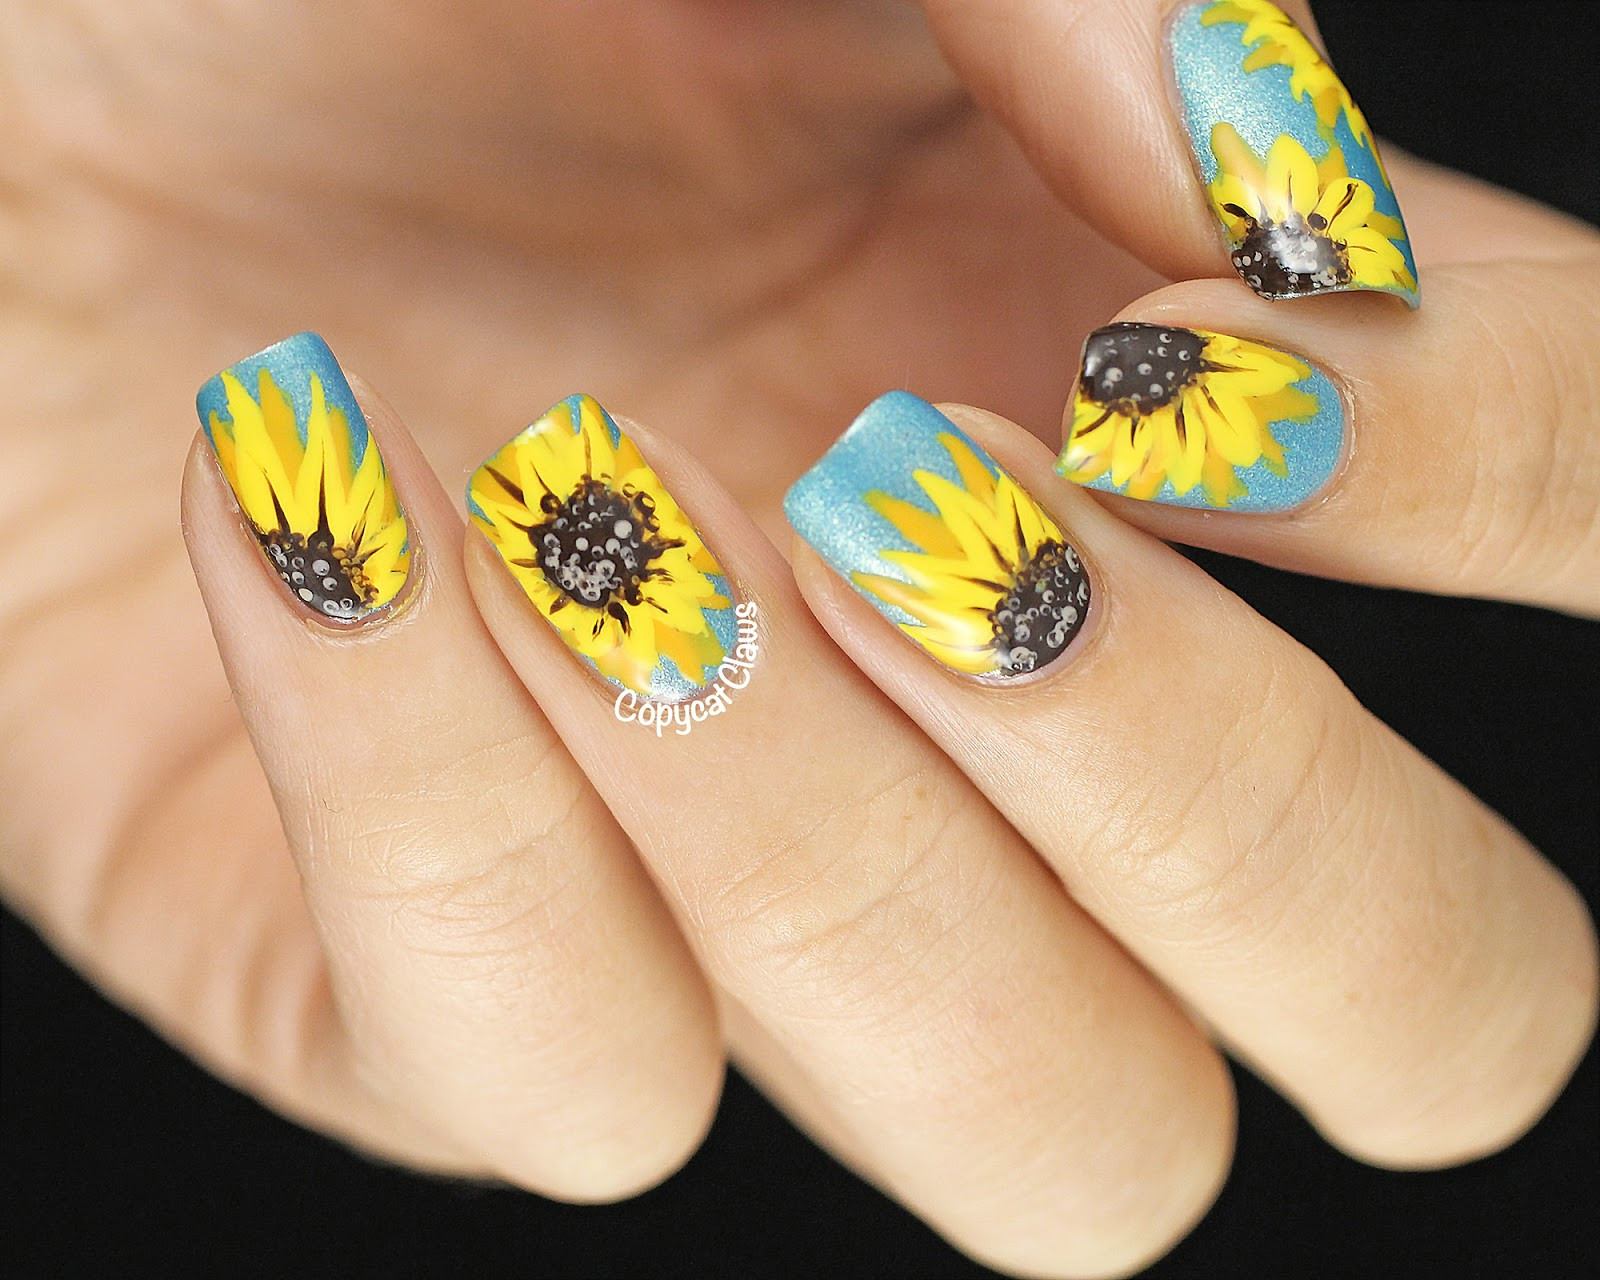 Sunflower Nail Designs
 Copycat Claws 31DC2014 Day 3 Yellow Sunflower Nail Art